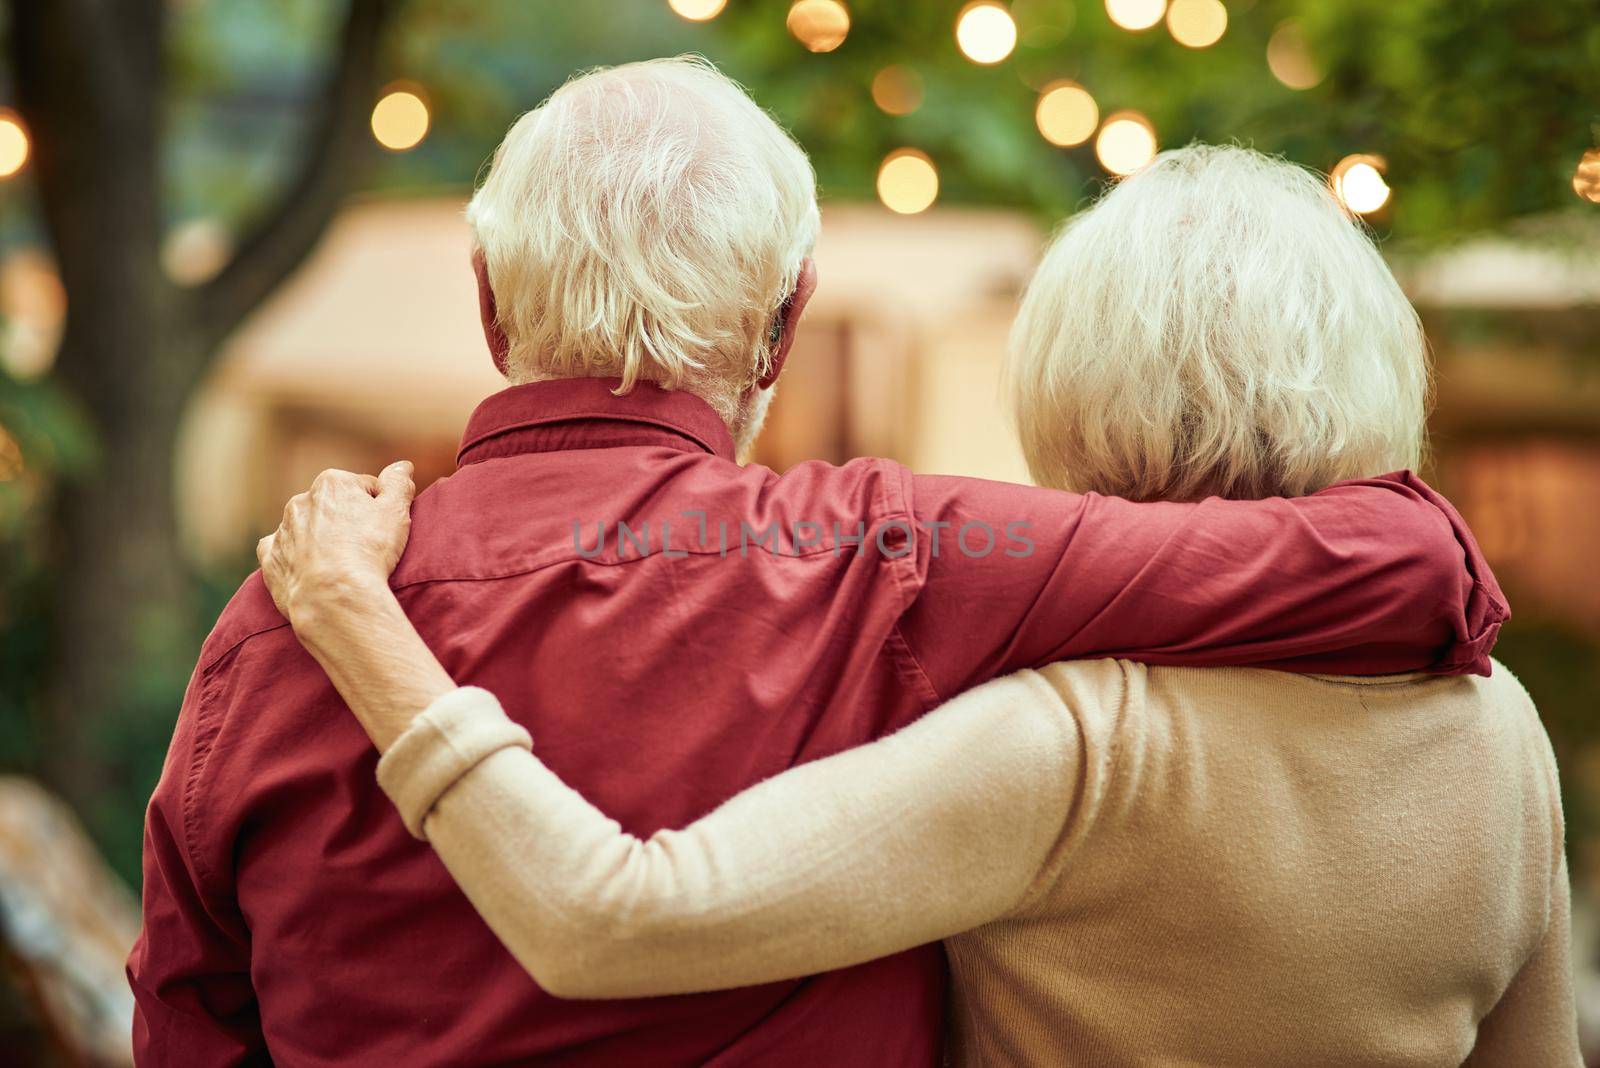 Back view of spouses standing outdoors while embracing each other by friendsstock